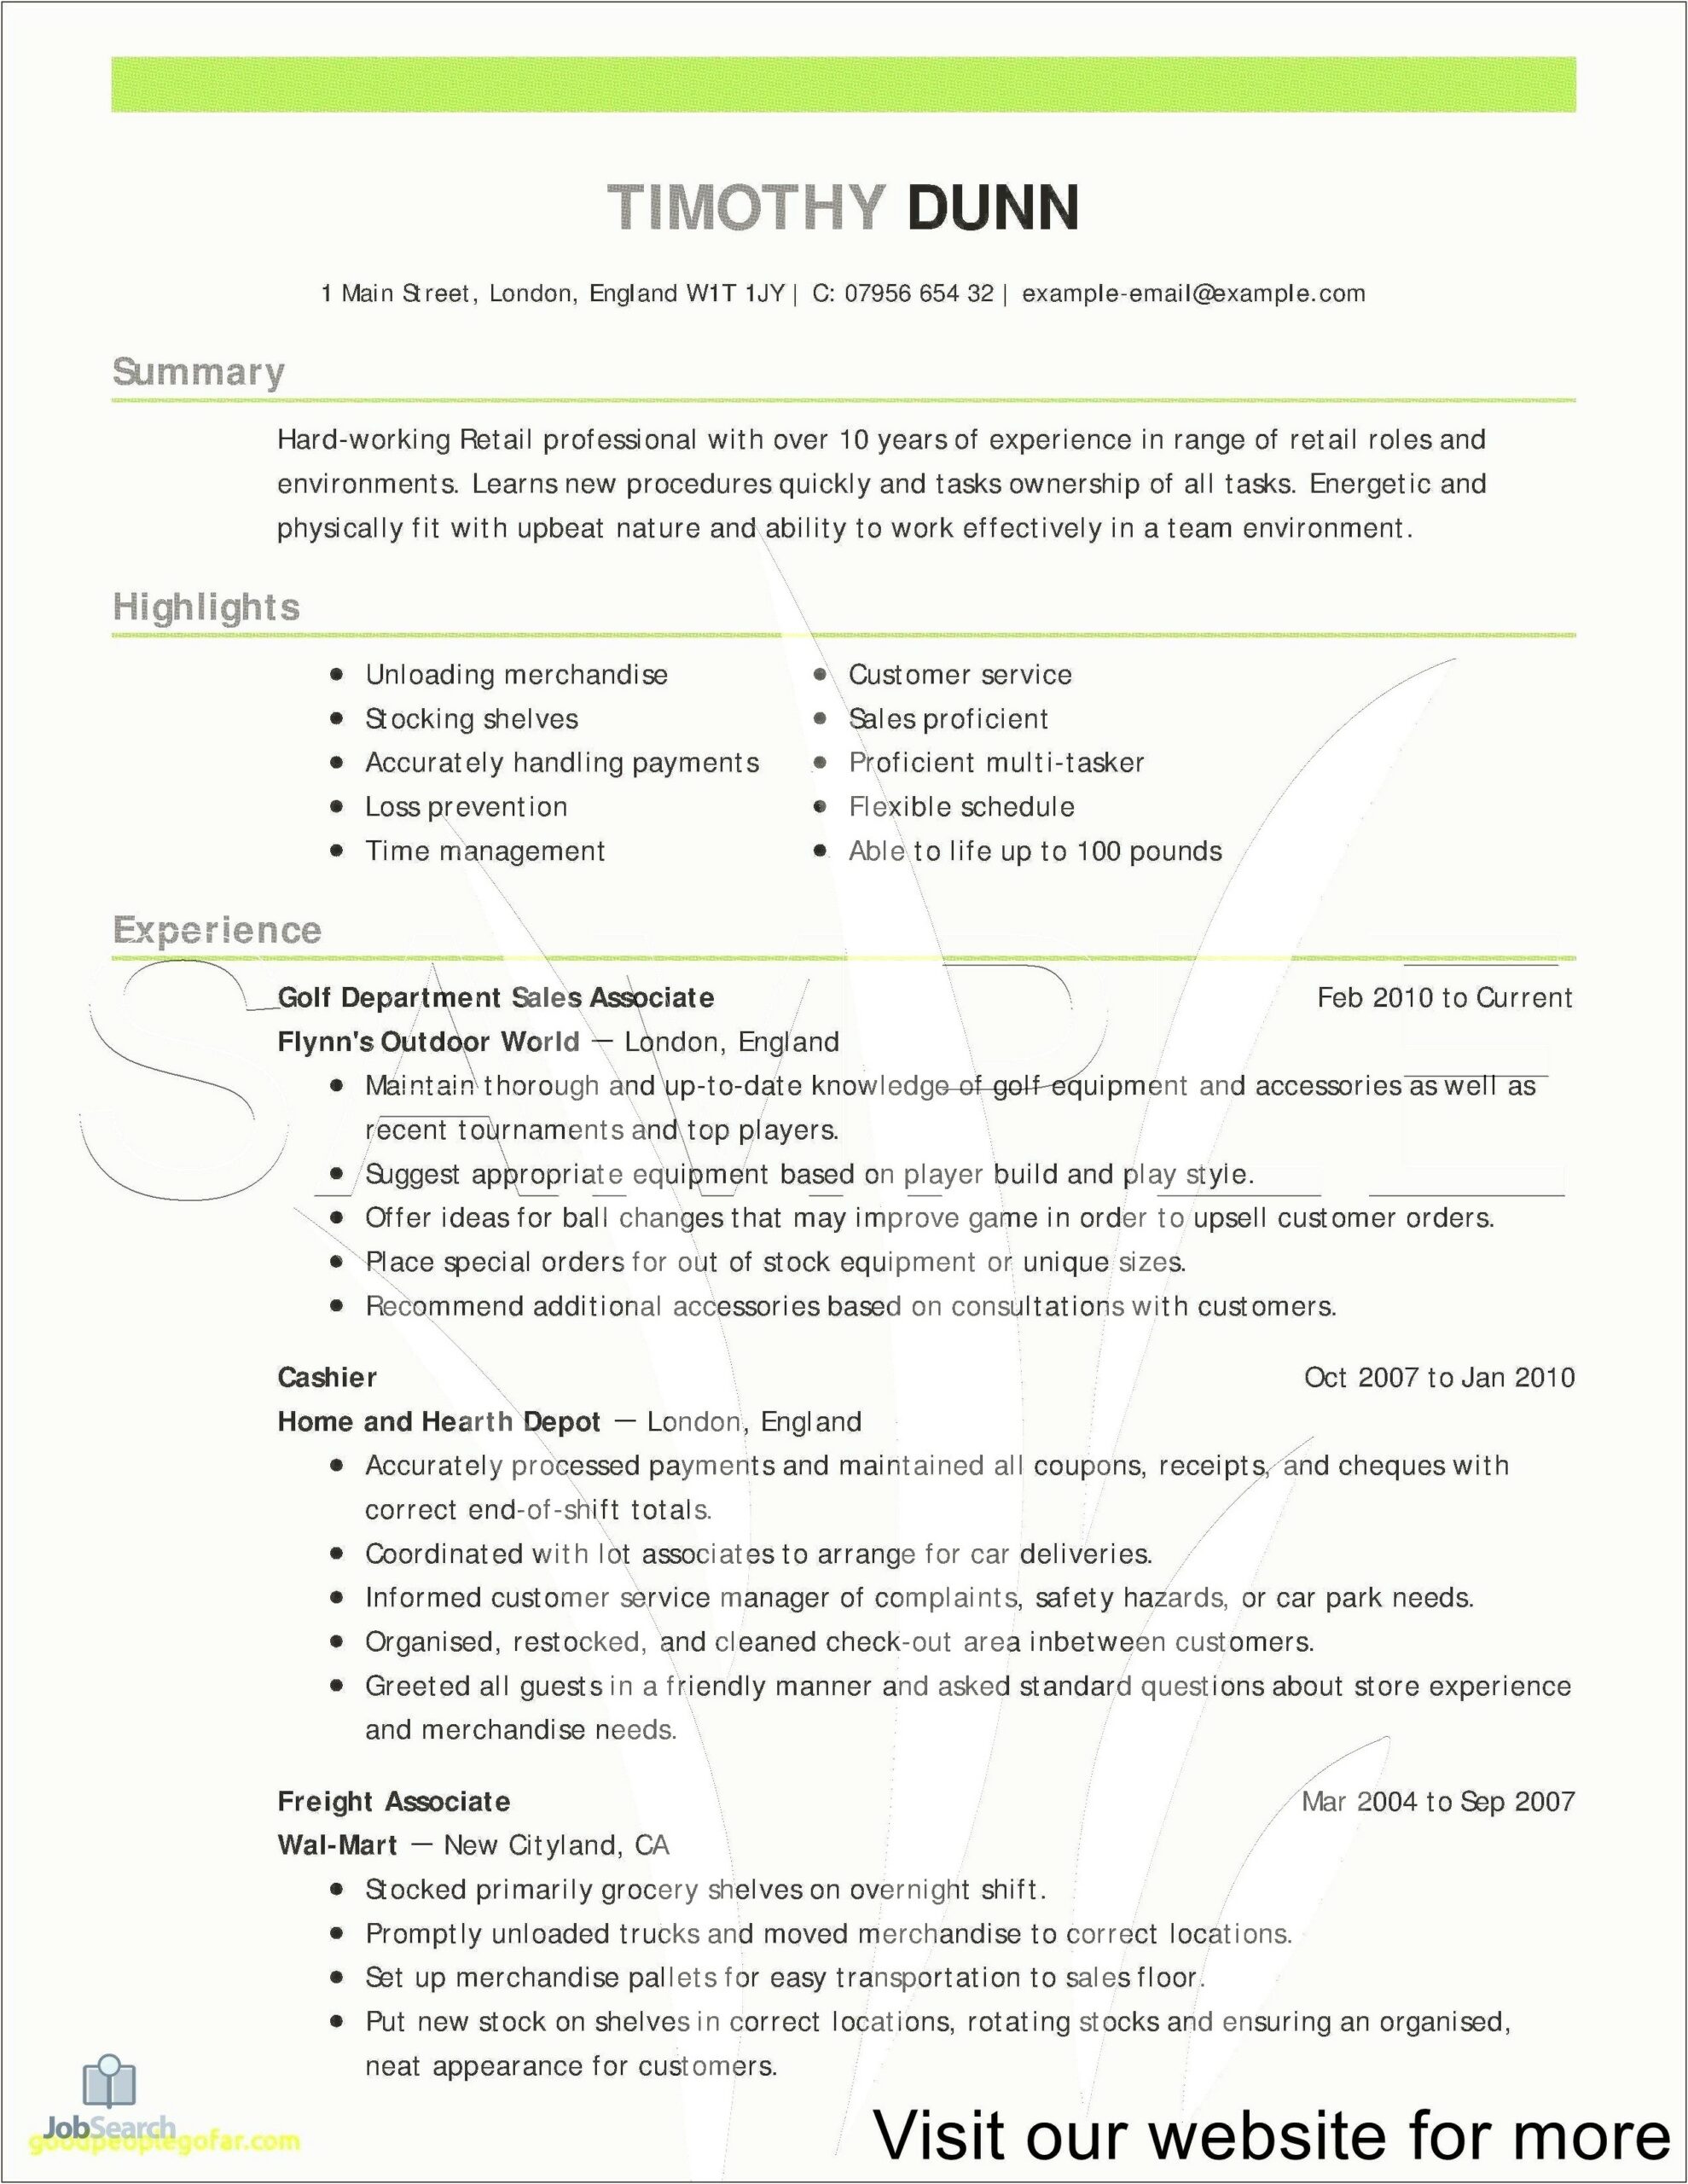 Freight Associate Objective On Resume